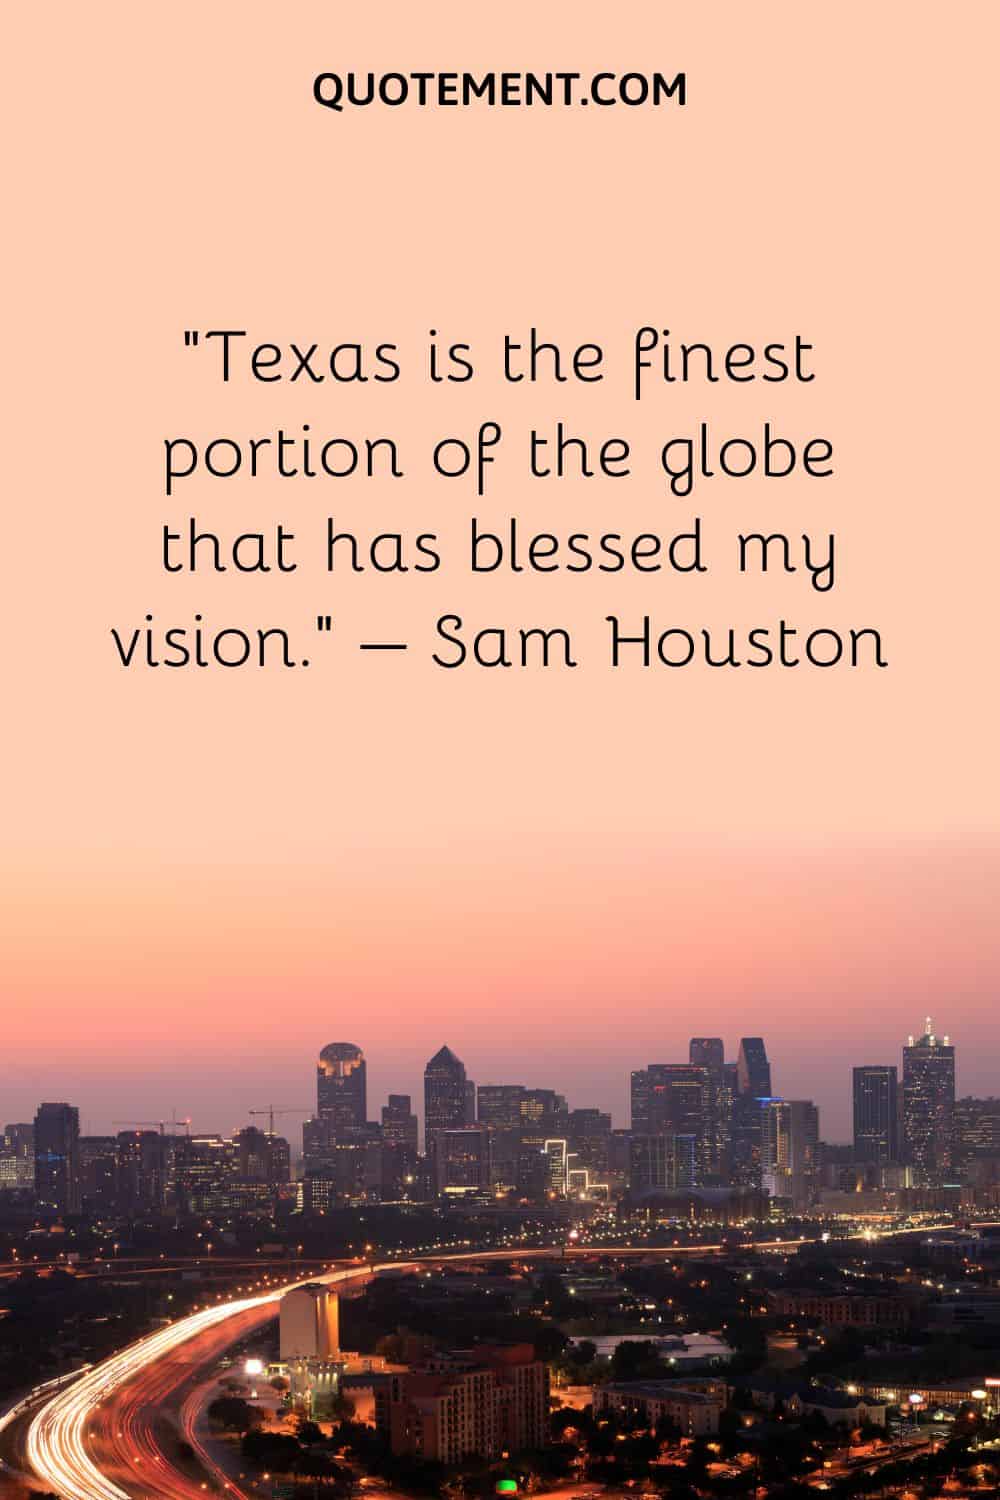 Texas is the finest portion of the globe that has blessed my vision. – Sam Houston